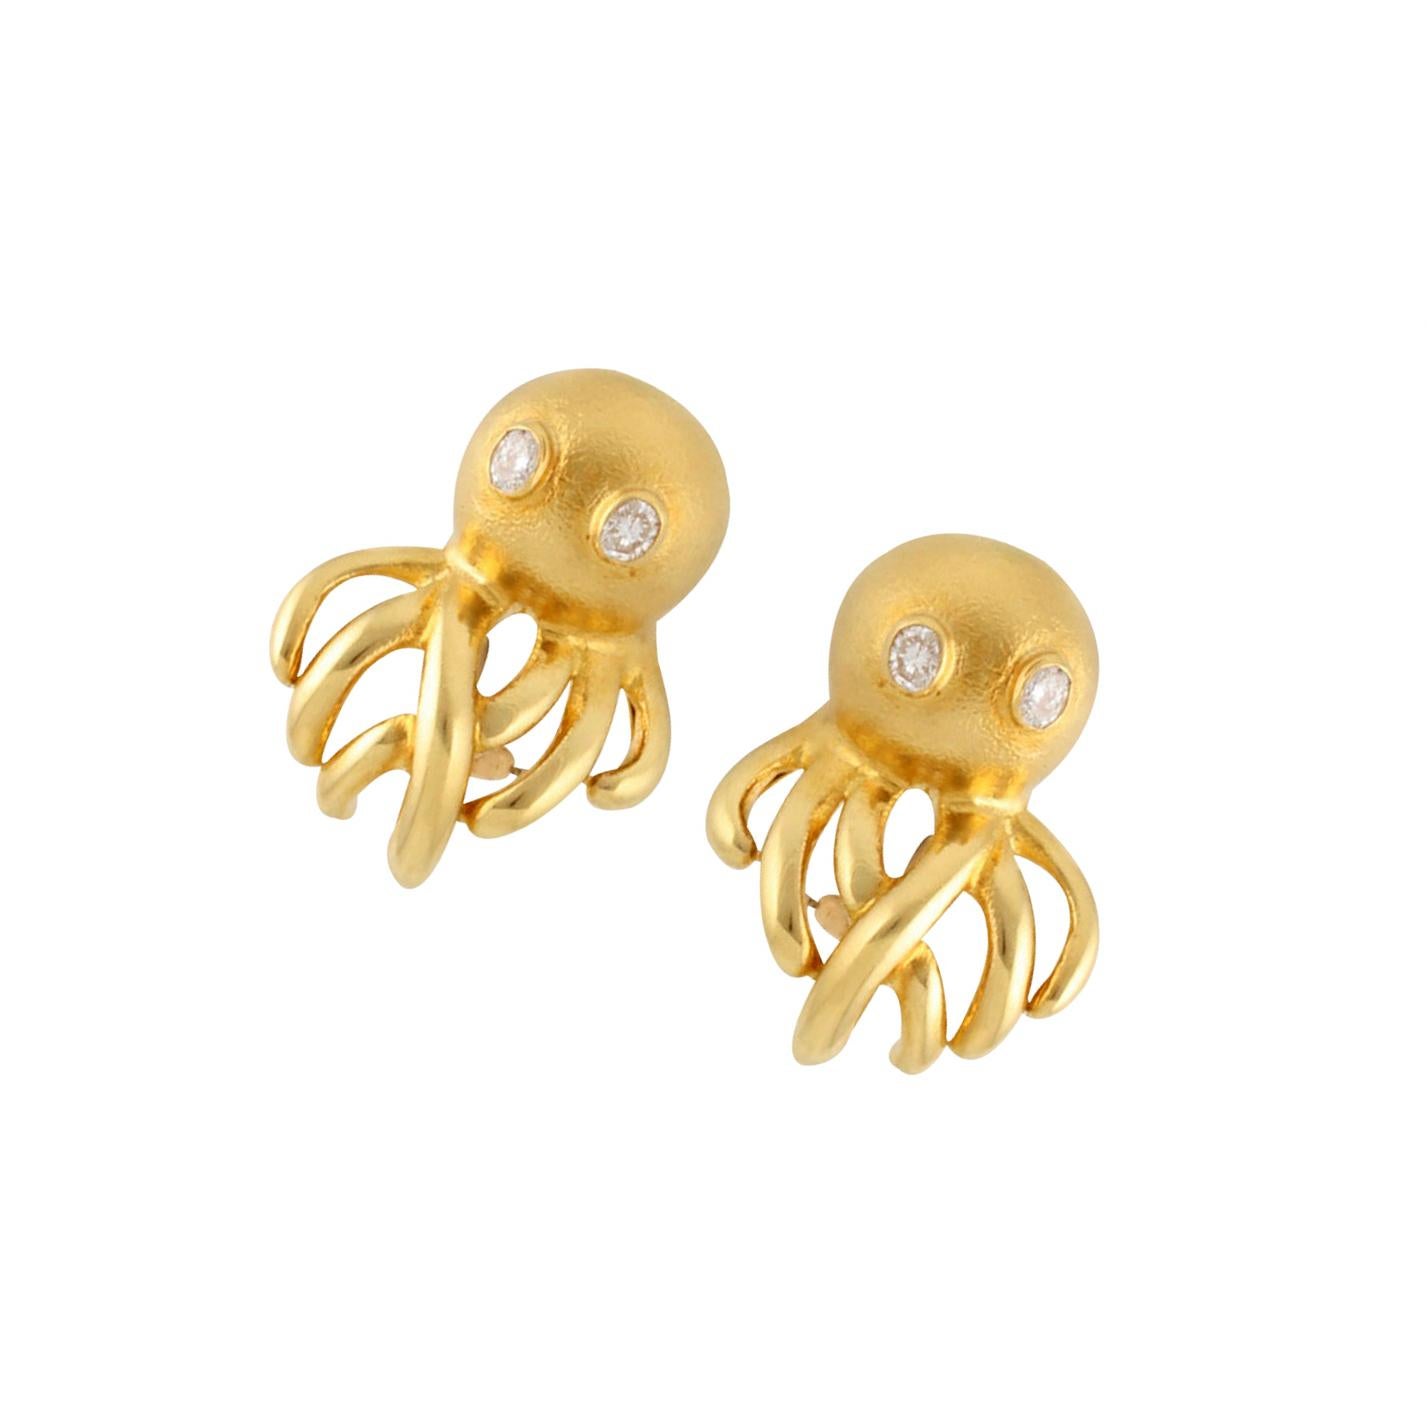 Oval Diamond Eyes 18k Gold Octopus Earrings by John Landrum Bryant In New Condition For Sale In New York, NY